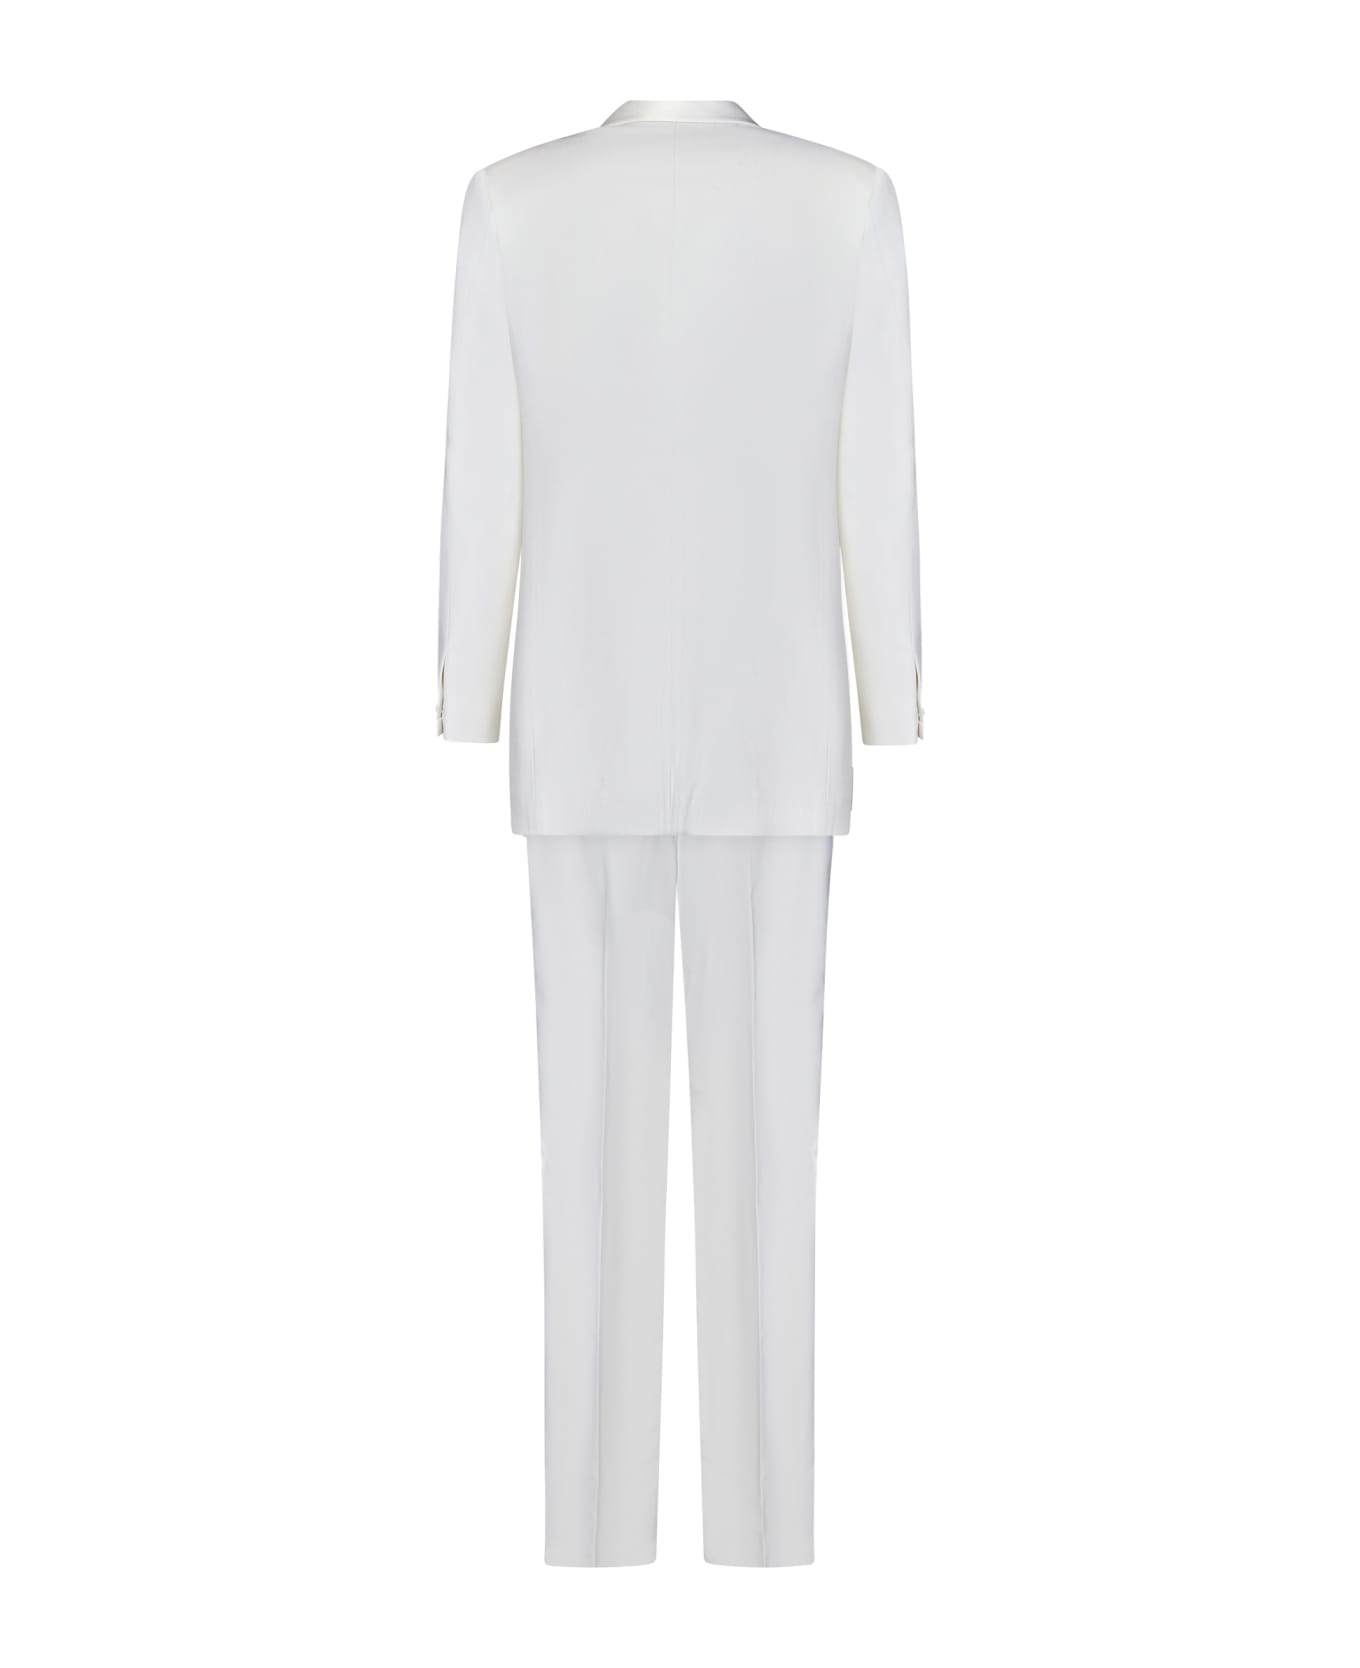 Givenchy Suit - White スーツ